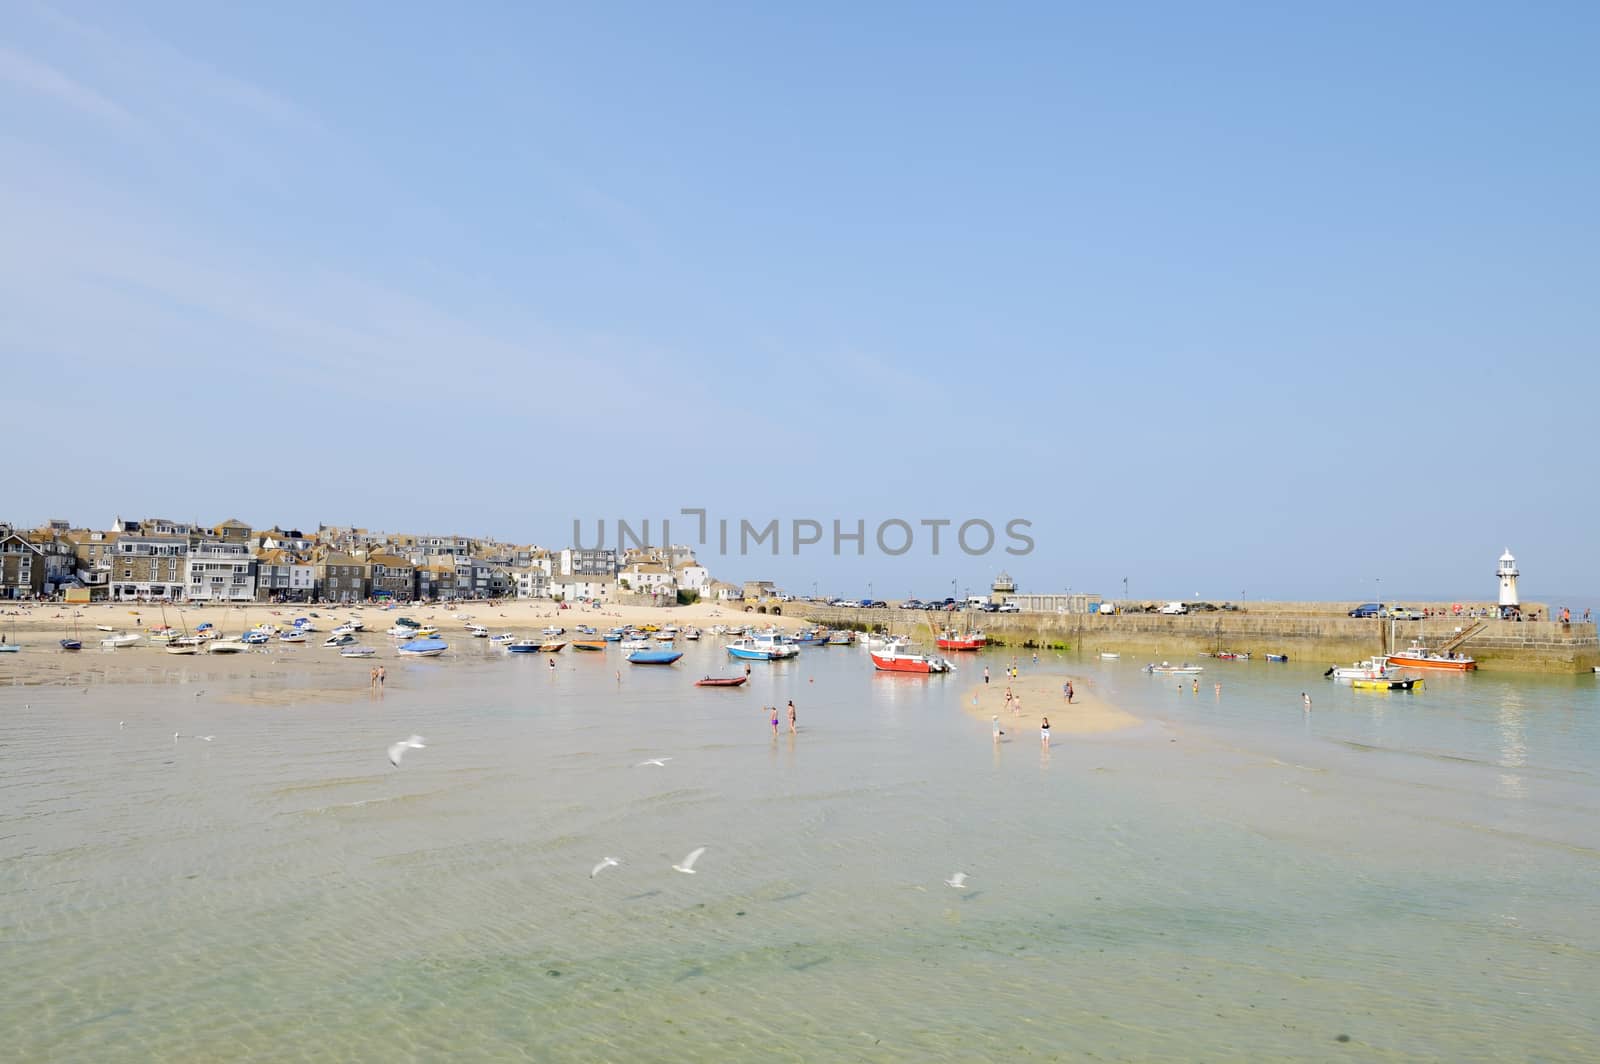 St Ives in Cornwall on a sunny day with seagulls flying and fishing boats in the background